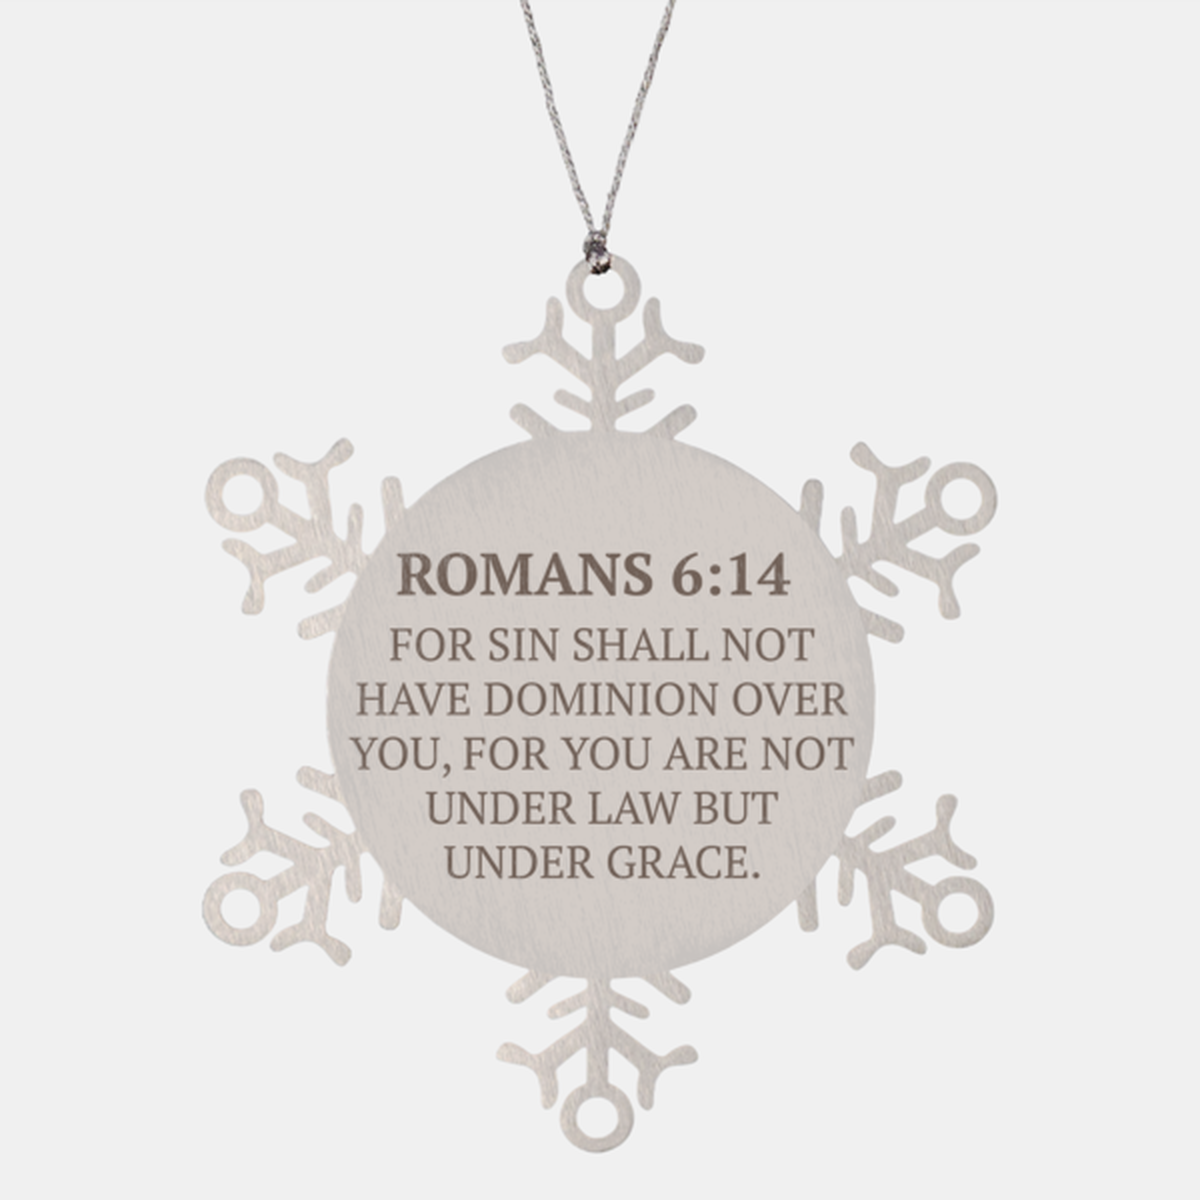 Christian Ornaments For Christmas Tree, For Sin Shall Not Have Dominion Over You, Religious Christmas Decorations, Scripture Ornaments Gifts, Bible Verse Ornament